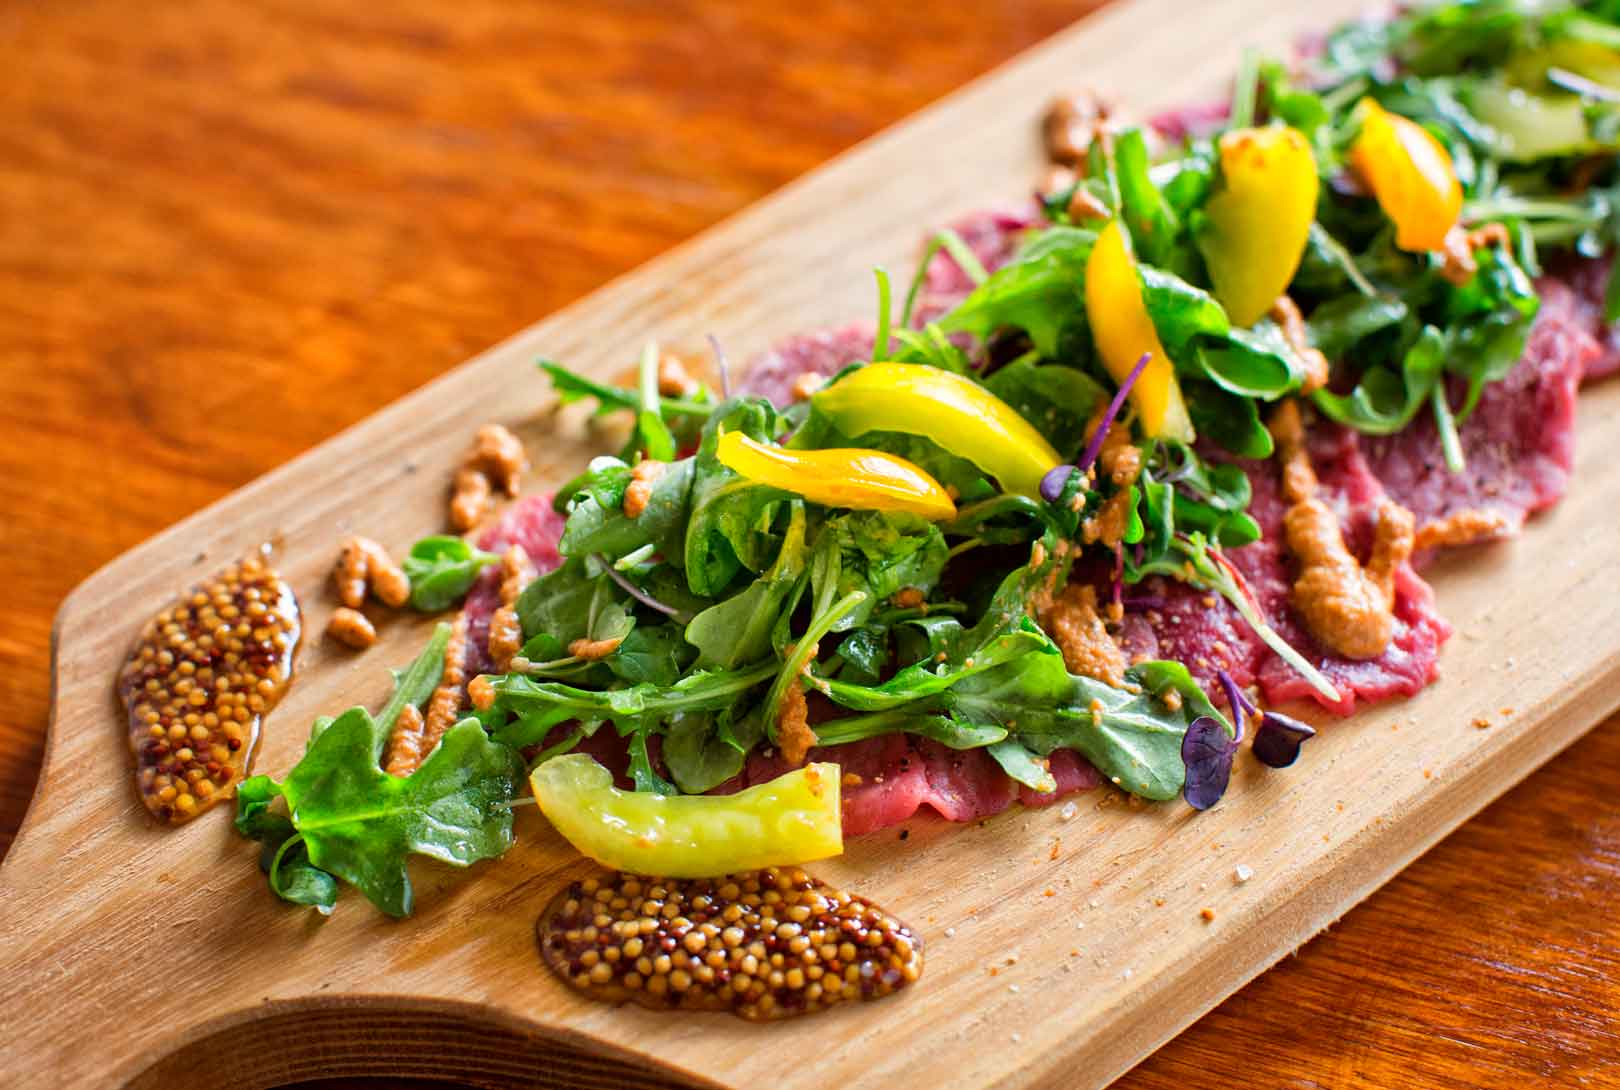 Beef Carpaccio Topped With Arugula, Peppers And Jam